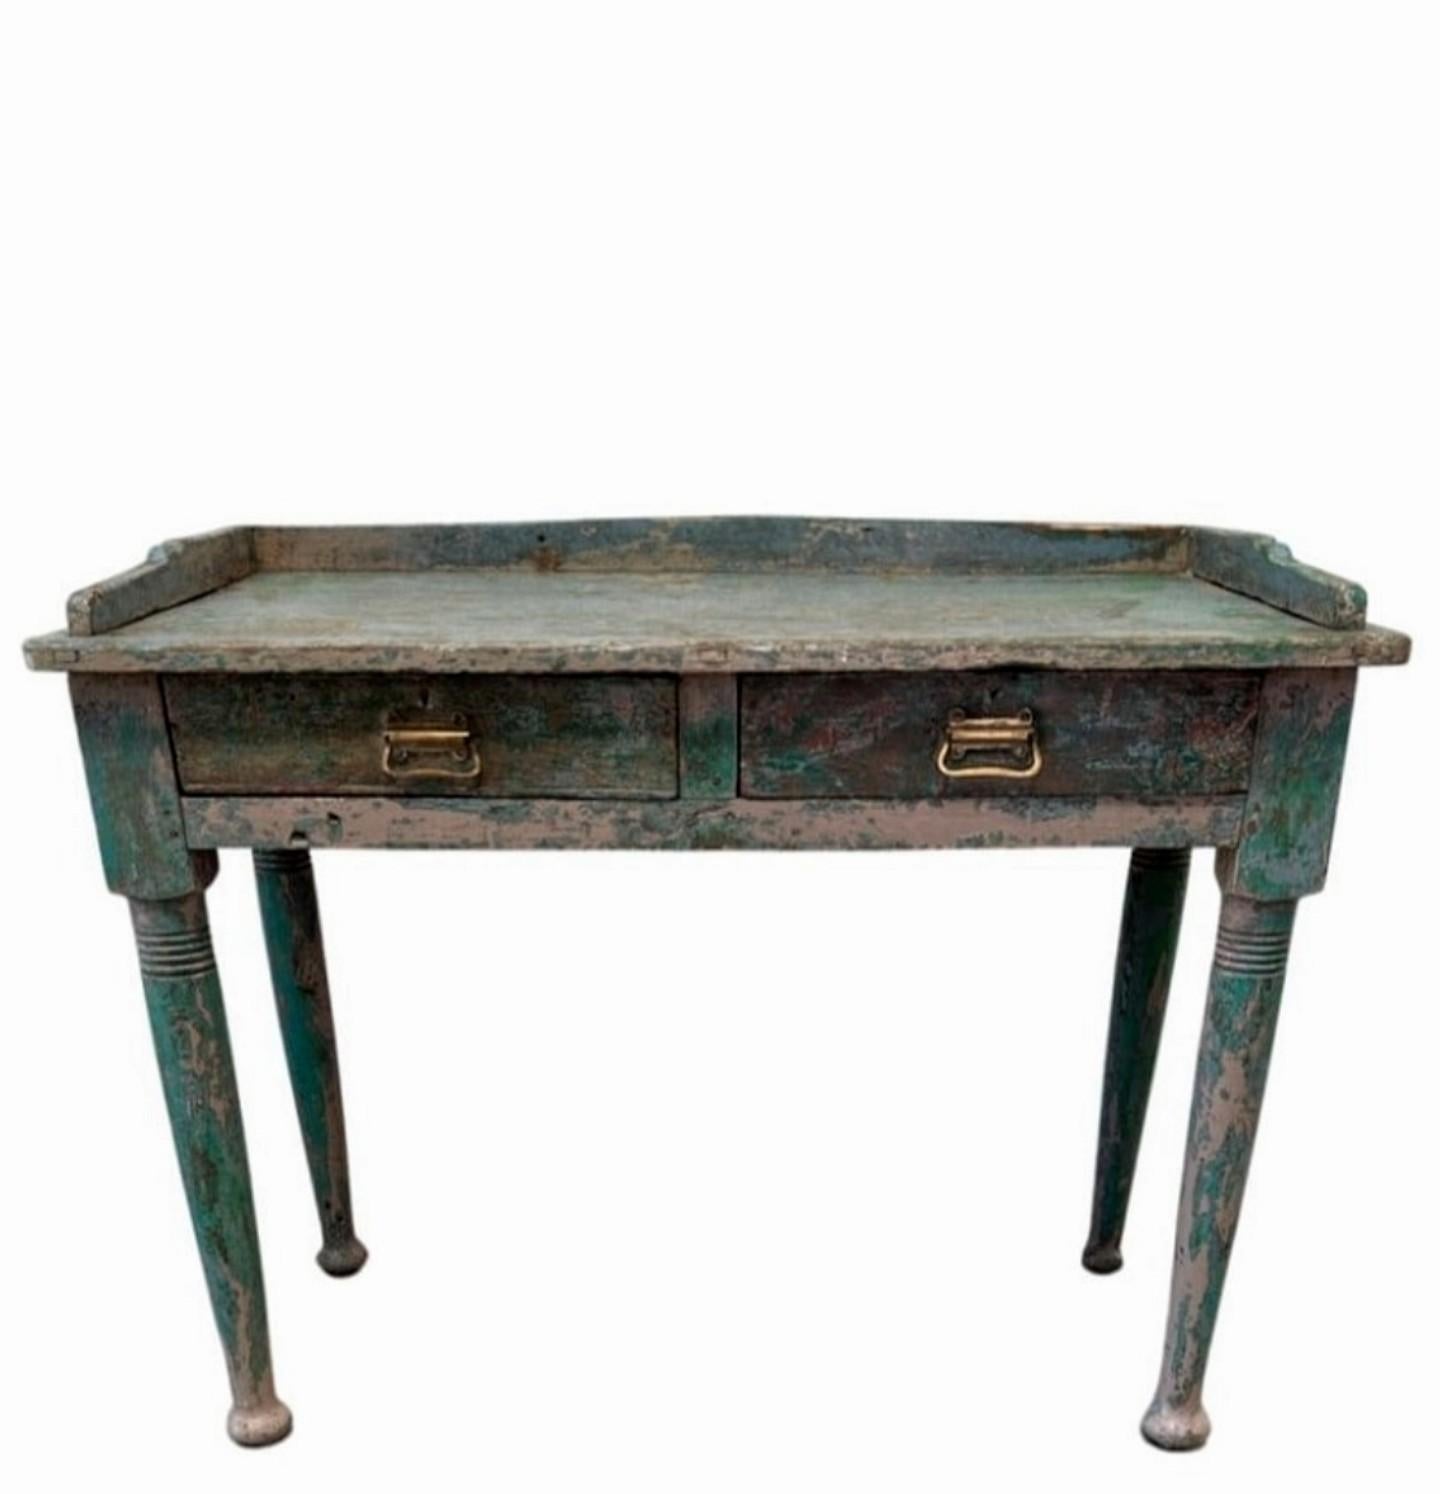 A scarce country European antique painted pine farmhouse sorting table - server with beautifully aged heavily worn patina!

Hand-crafted in Europe in the late 18th / early 19th century, likely Scandinavian or Irish, possibly English Colonial,